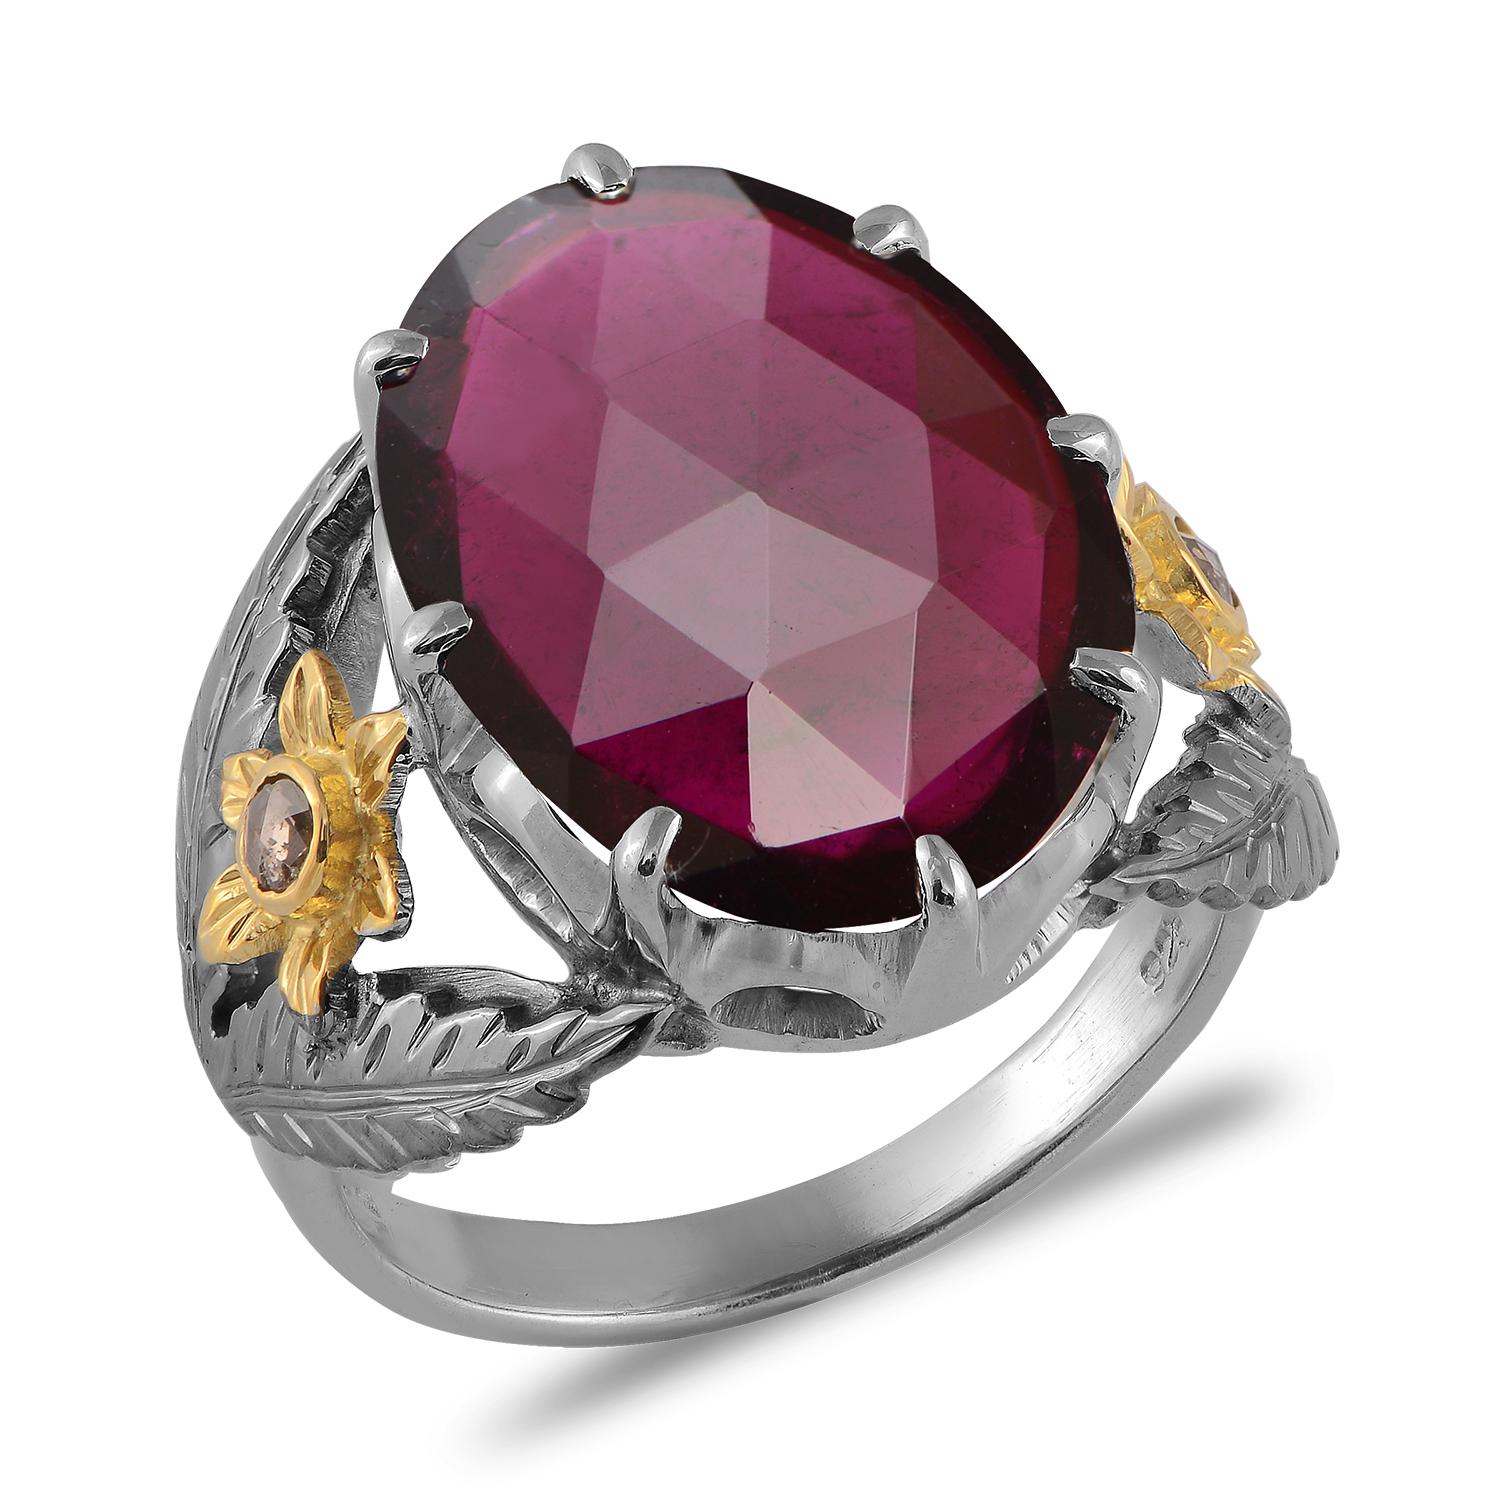 

A lovely one-of-a-kind pink tourmaline cocktail ring. This ring features a central pink tourmaline, set in hand-engraved oxidized sterling silver, and flanked by two full cut diamonds which are set in 18kt gold hand-engraved flowers. This ring has